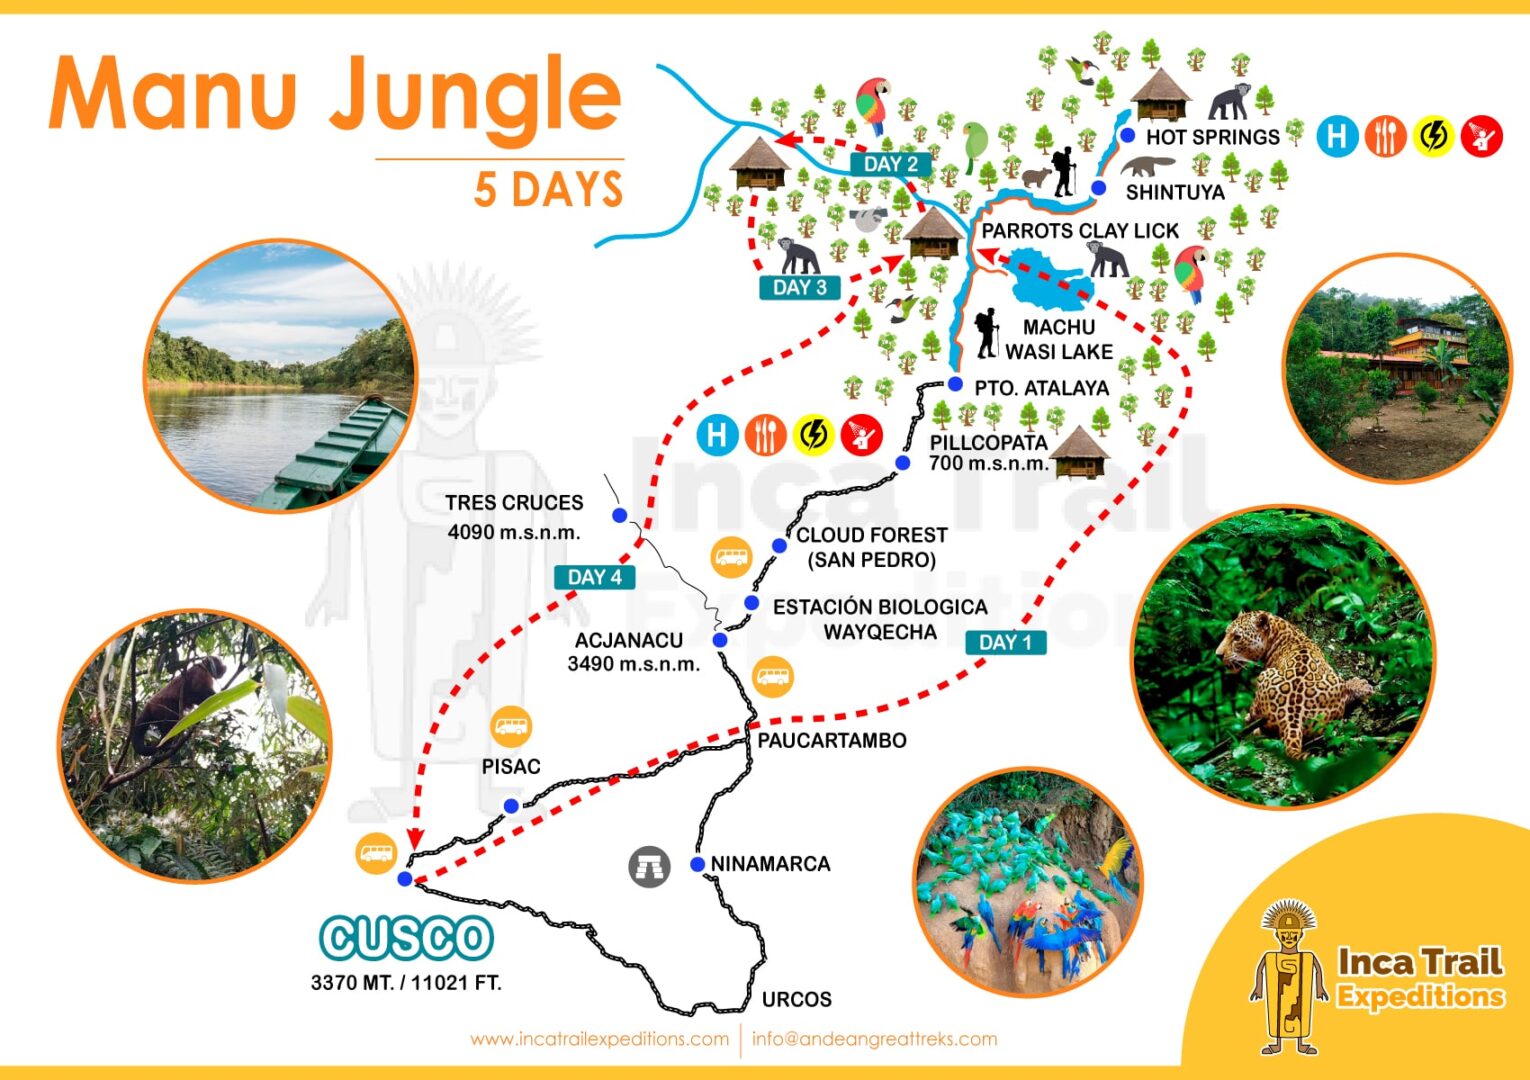 MANU-JUNGLE-5-DAYS-BY-INCA-TRAIL-EXPEDITIONS